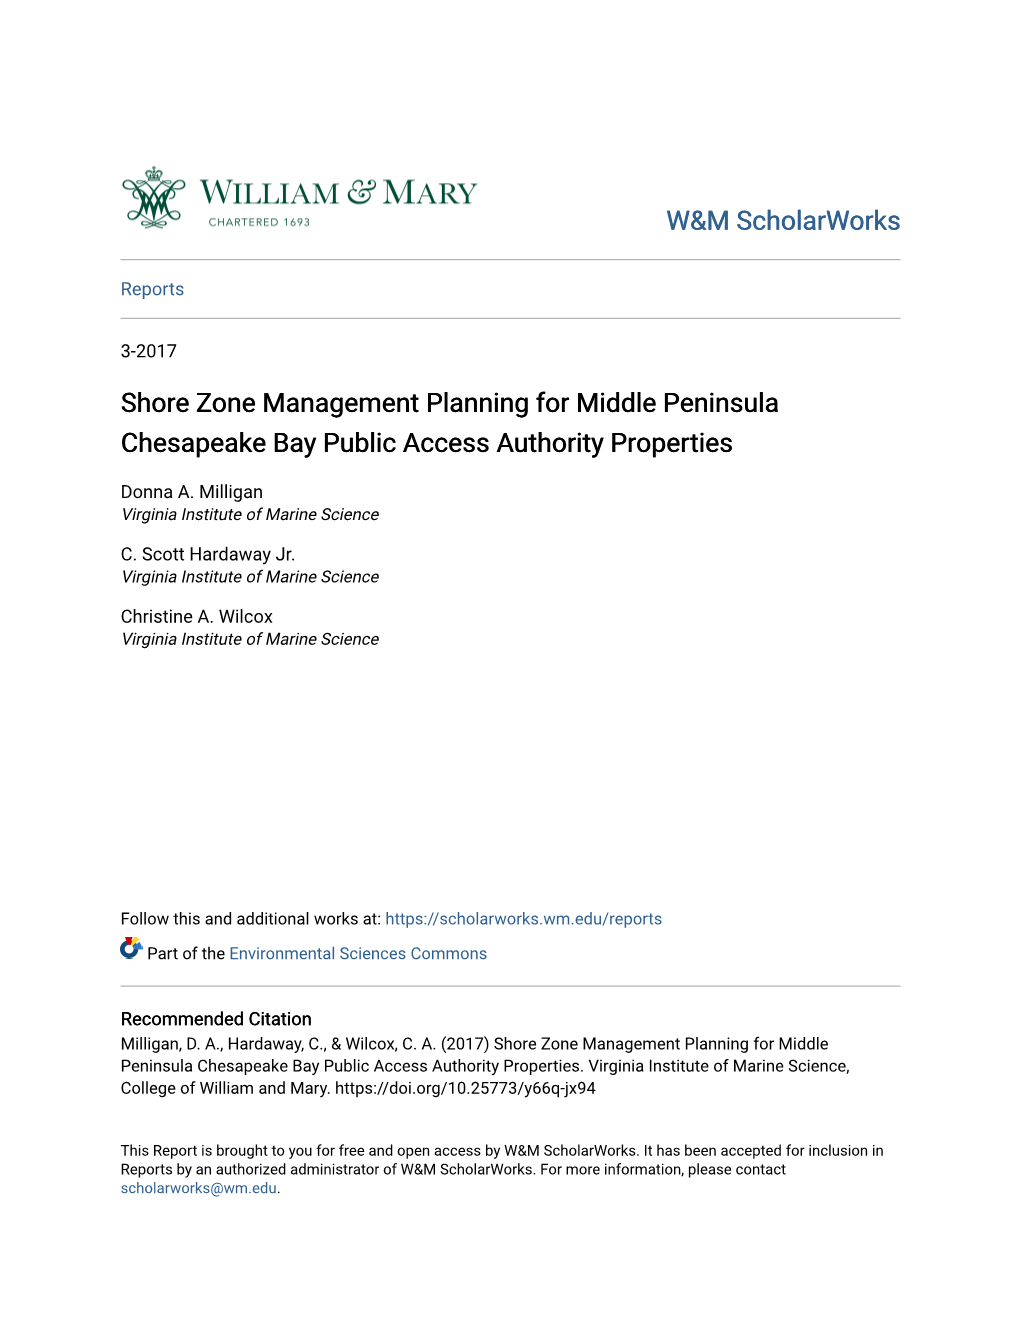 Shore Zone Management Planning for Middle Peninsula Chesapeake Bay Public Access Authority Properties